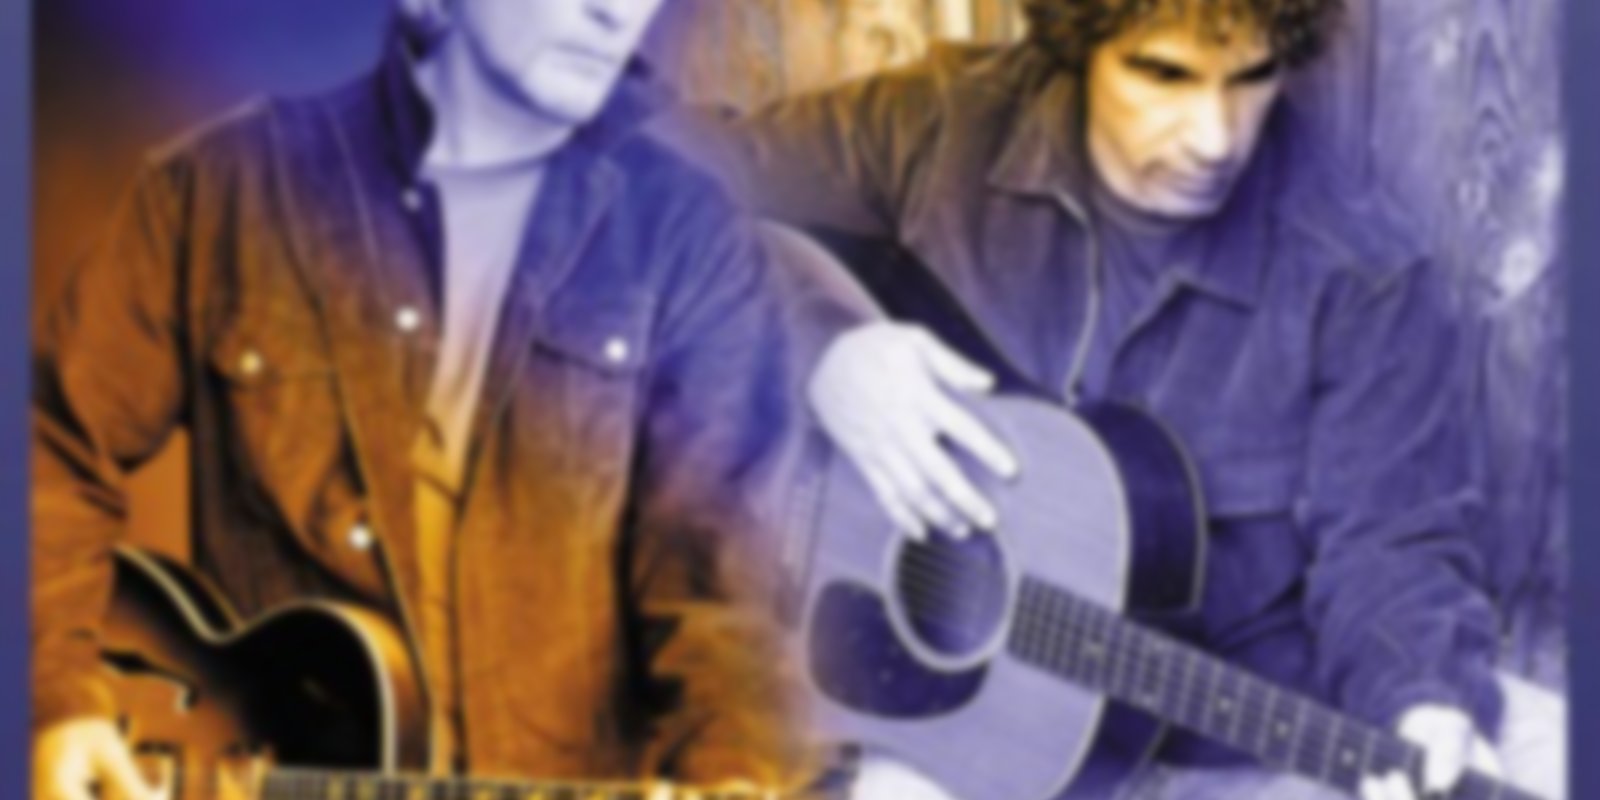 Daryl Hall & John Oates - Live in Concert